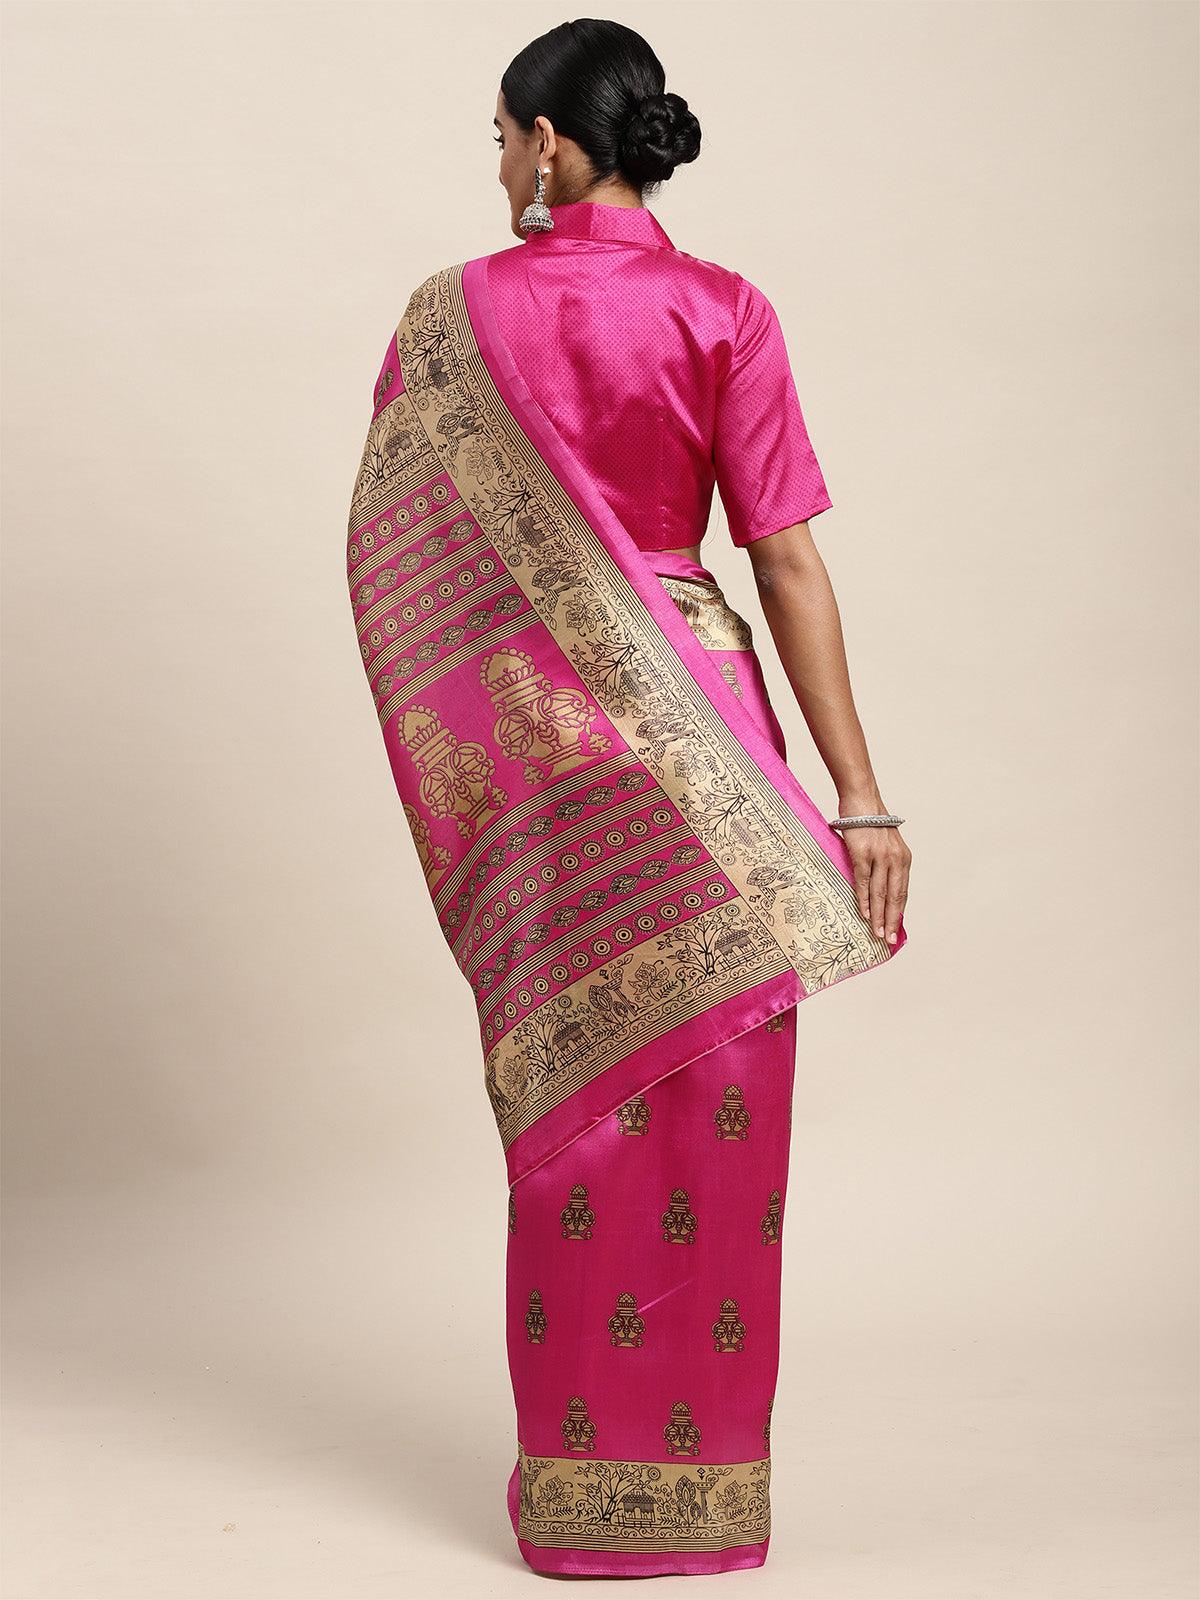 Silk Blend Pink Printed Saree With Blouse Piece - Odette